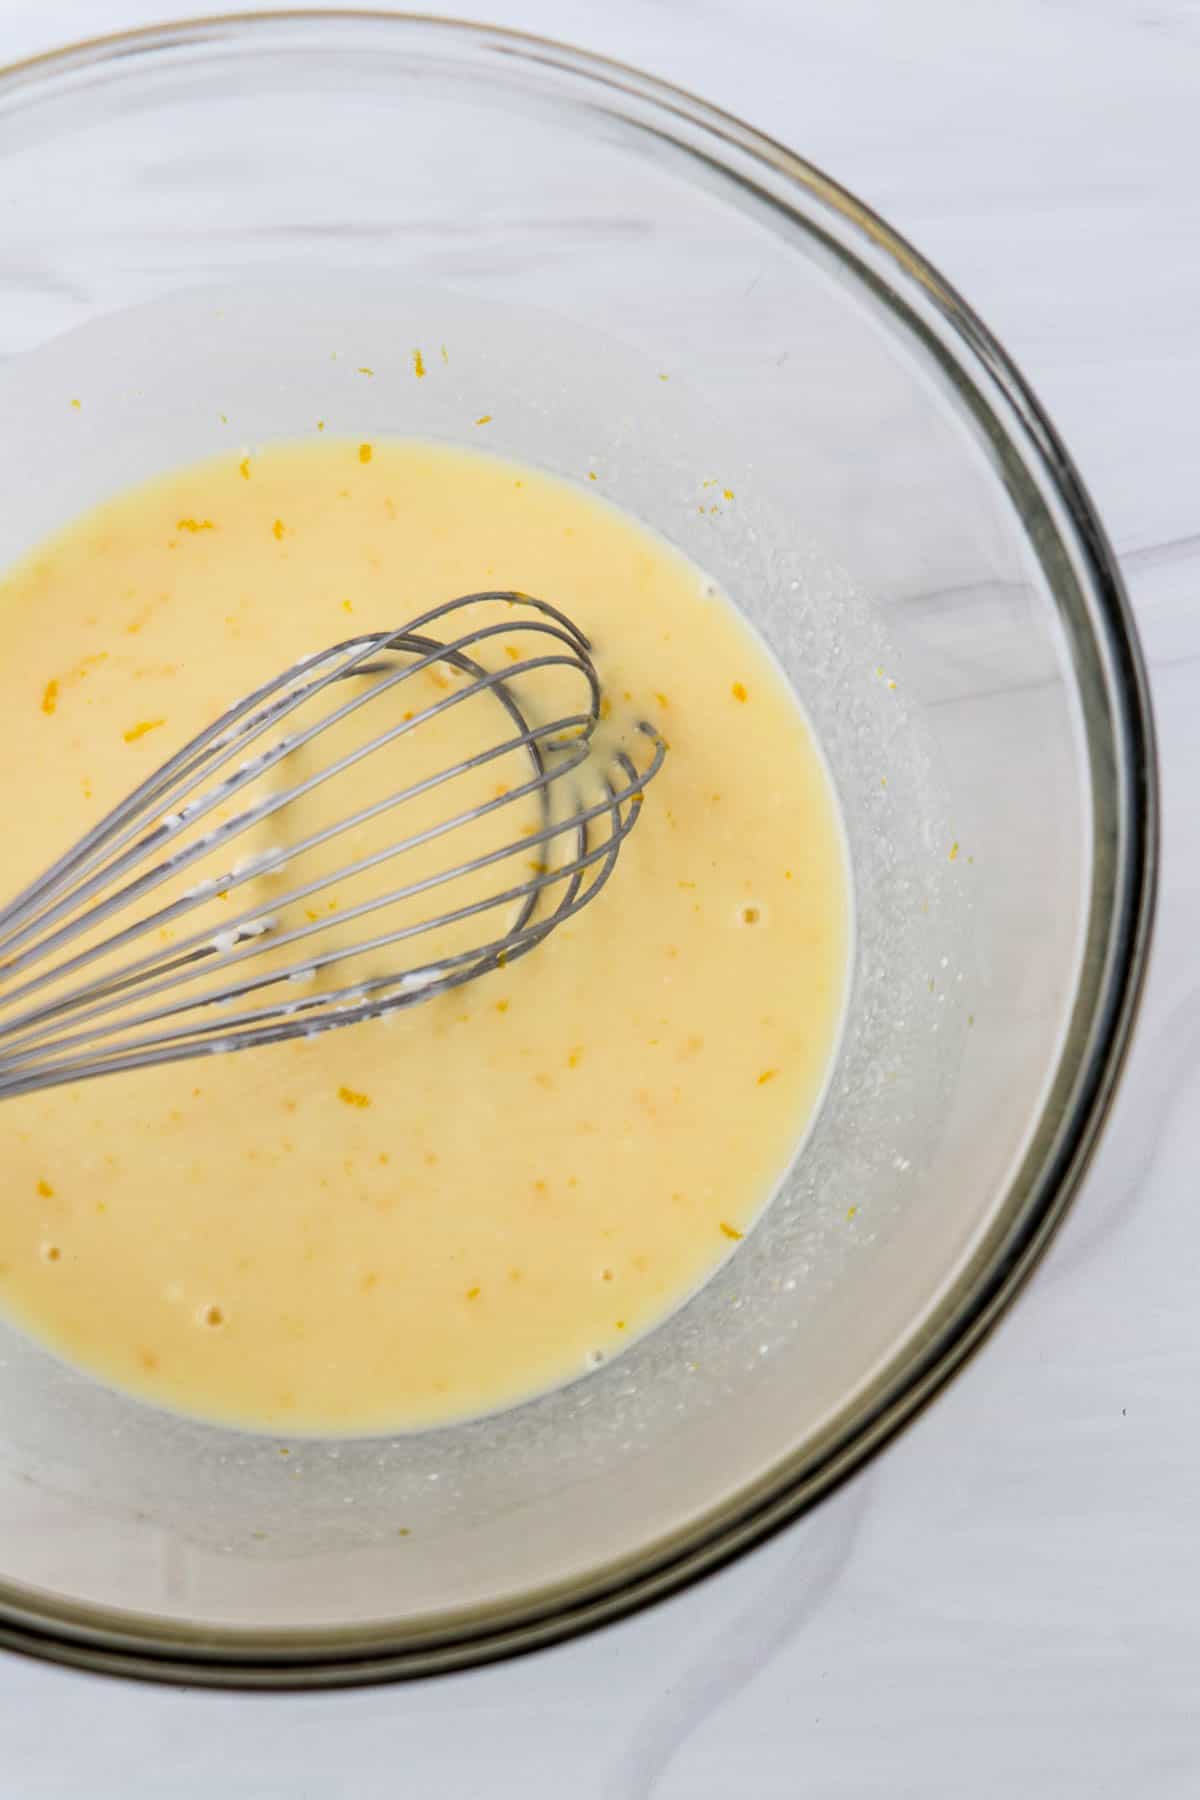 Orange juice and yogurt in a glass bowl with a whisk.